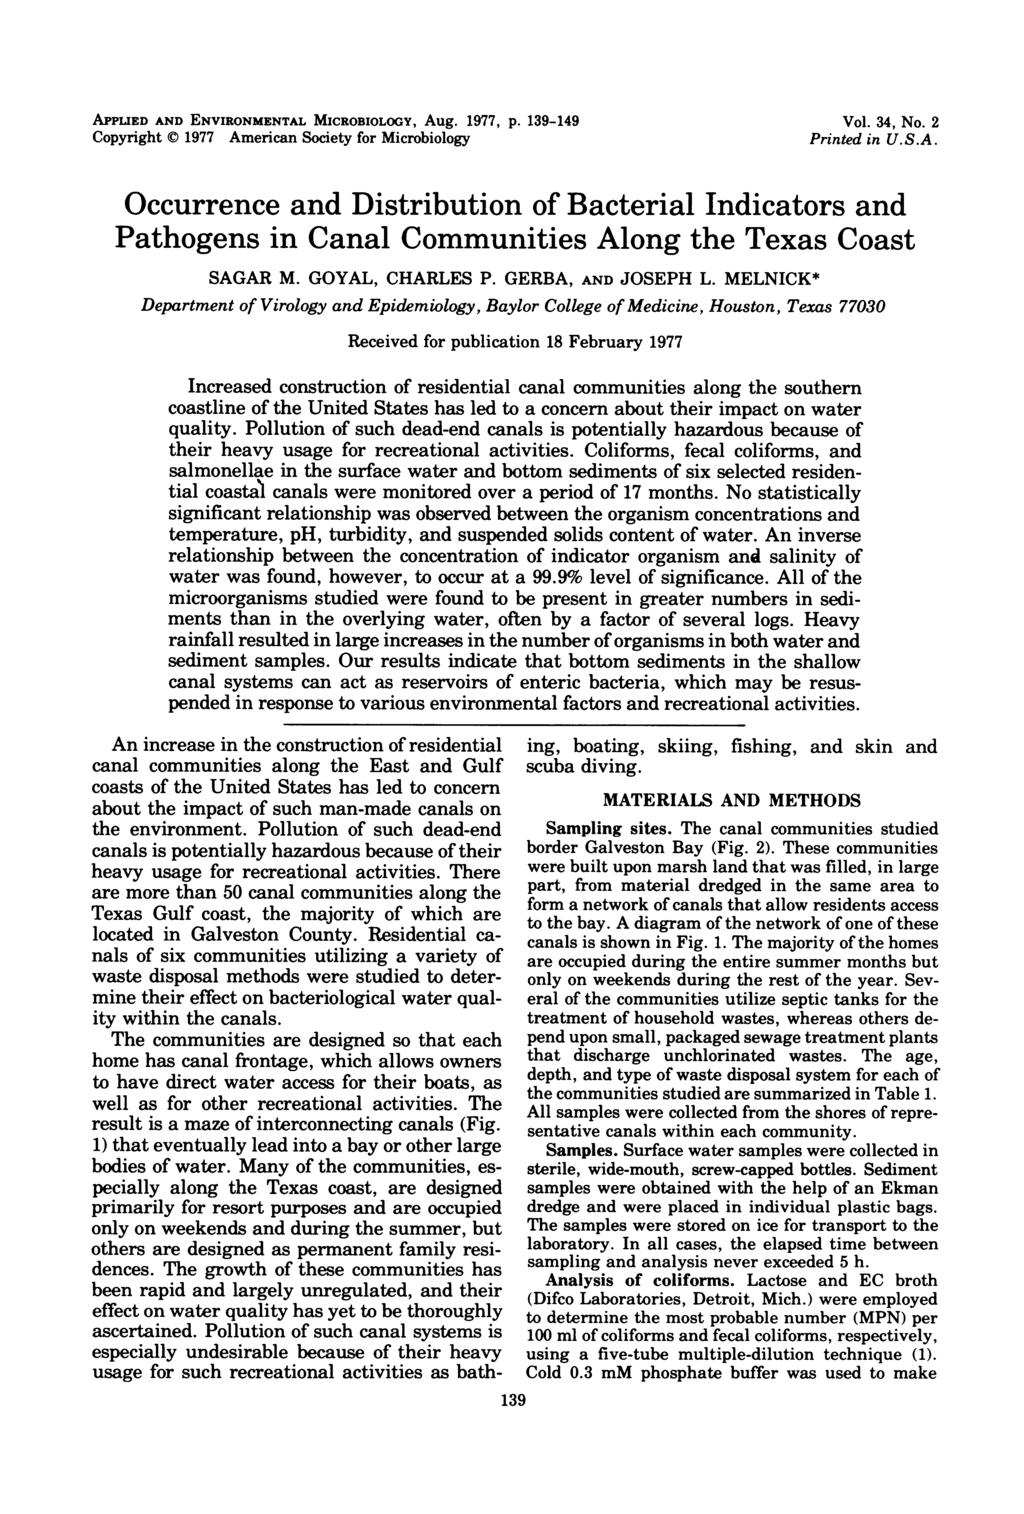 PPLED ND ENVRONMENTL MCROBOLOGY, ug. 1977, p. 139-149 Copyright C 1977 mericn Society for Microbiology Vol. 34, No. 2 Printed in U.S.. Occurrence nd Distribution of Bcteril ndictors nd Pthogens in Cnl Communities long the Texs Cost SGR M.